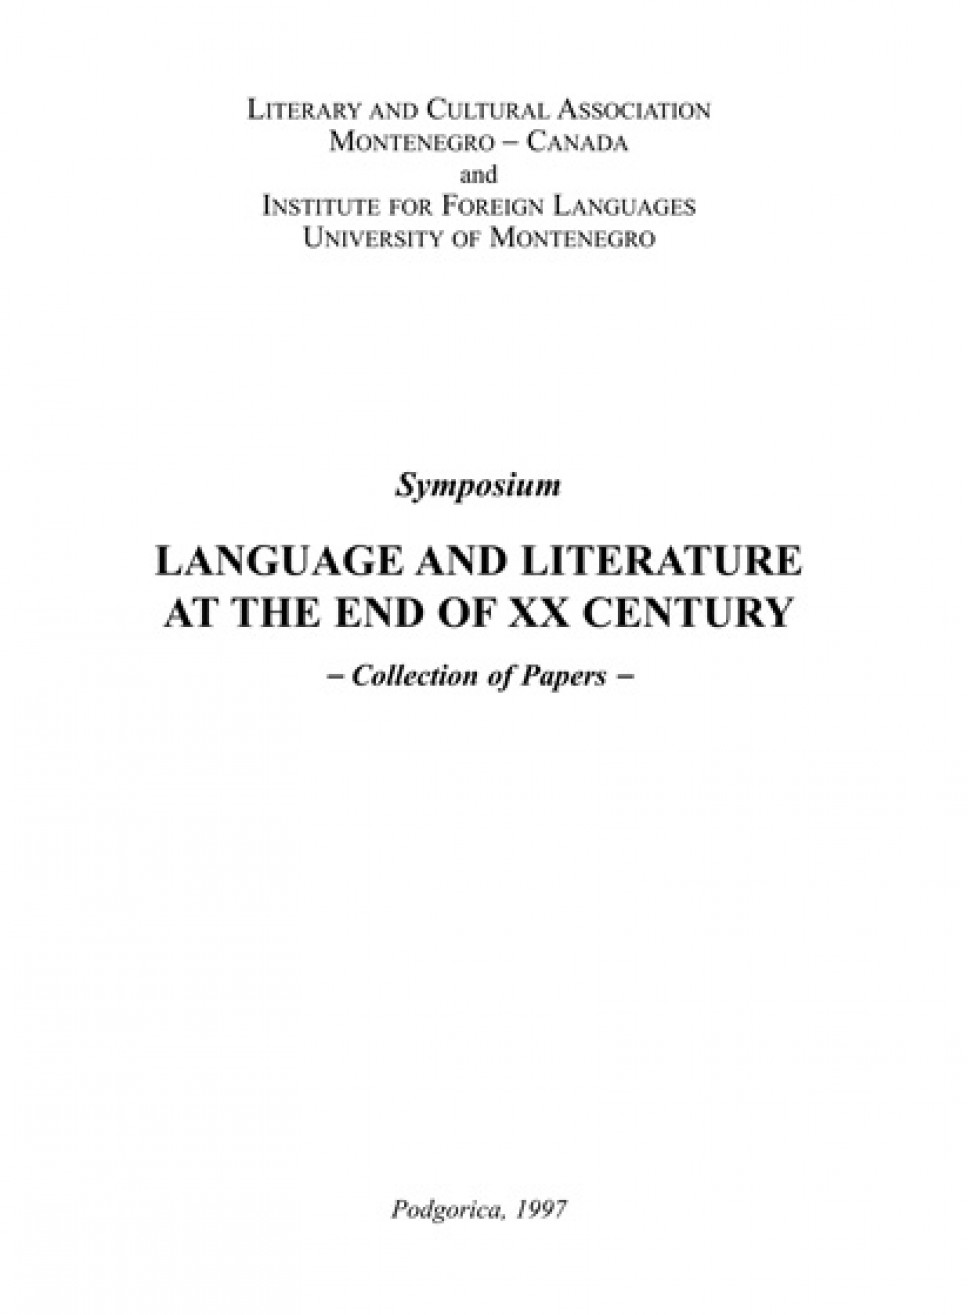 LANGUAGE AND LITERATURE AT THE END OF XX CENTURY